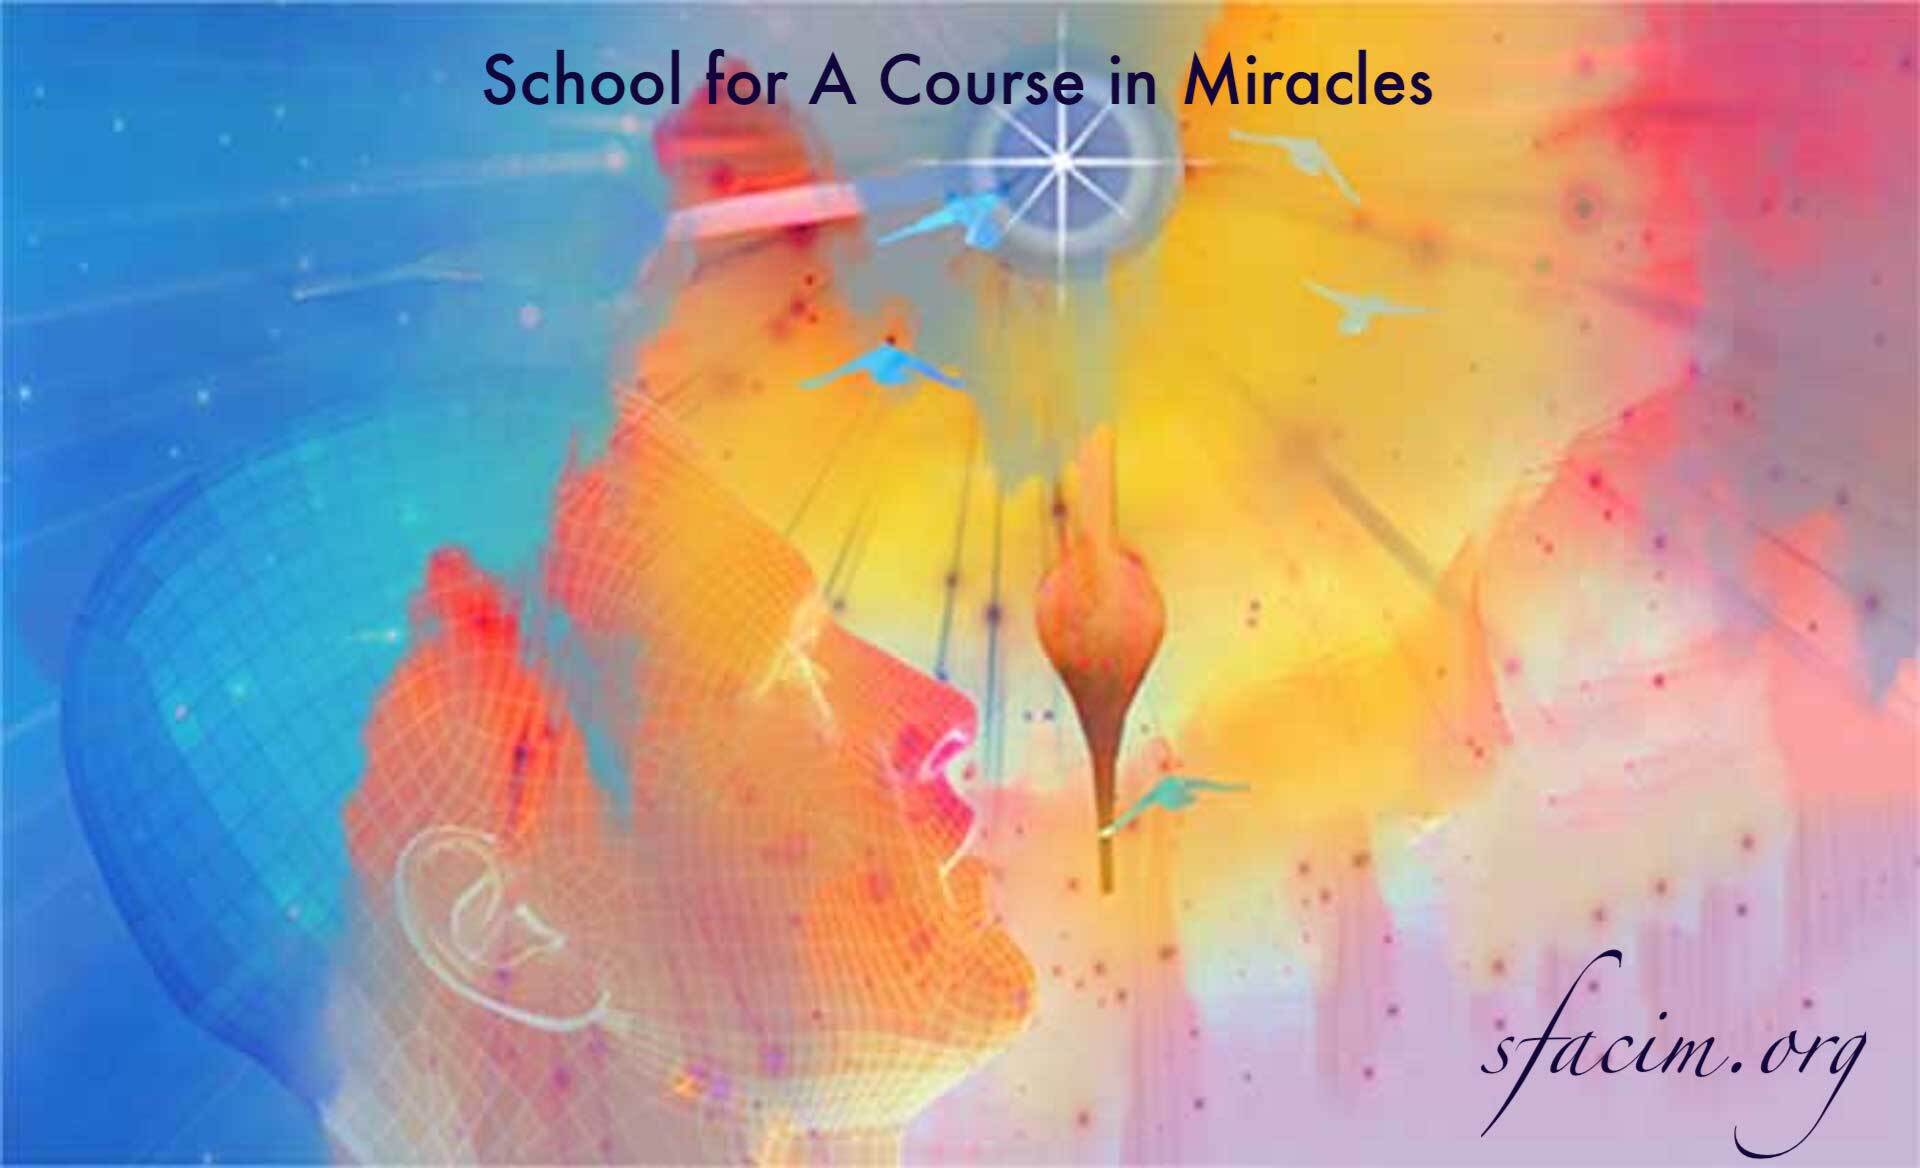 School for A Course in Miracles' Podcasts